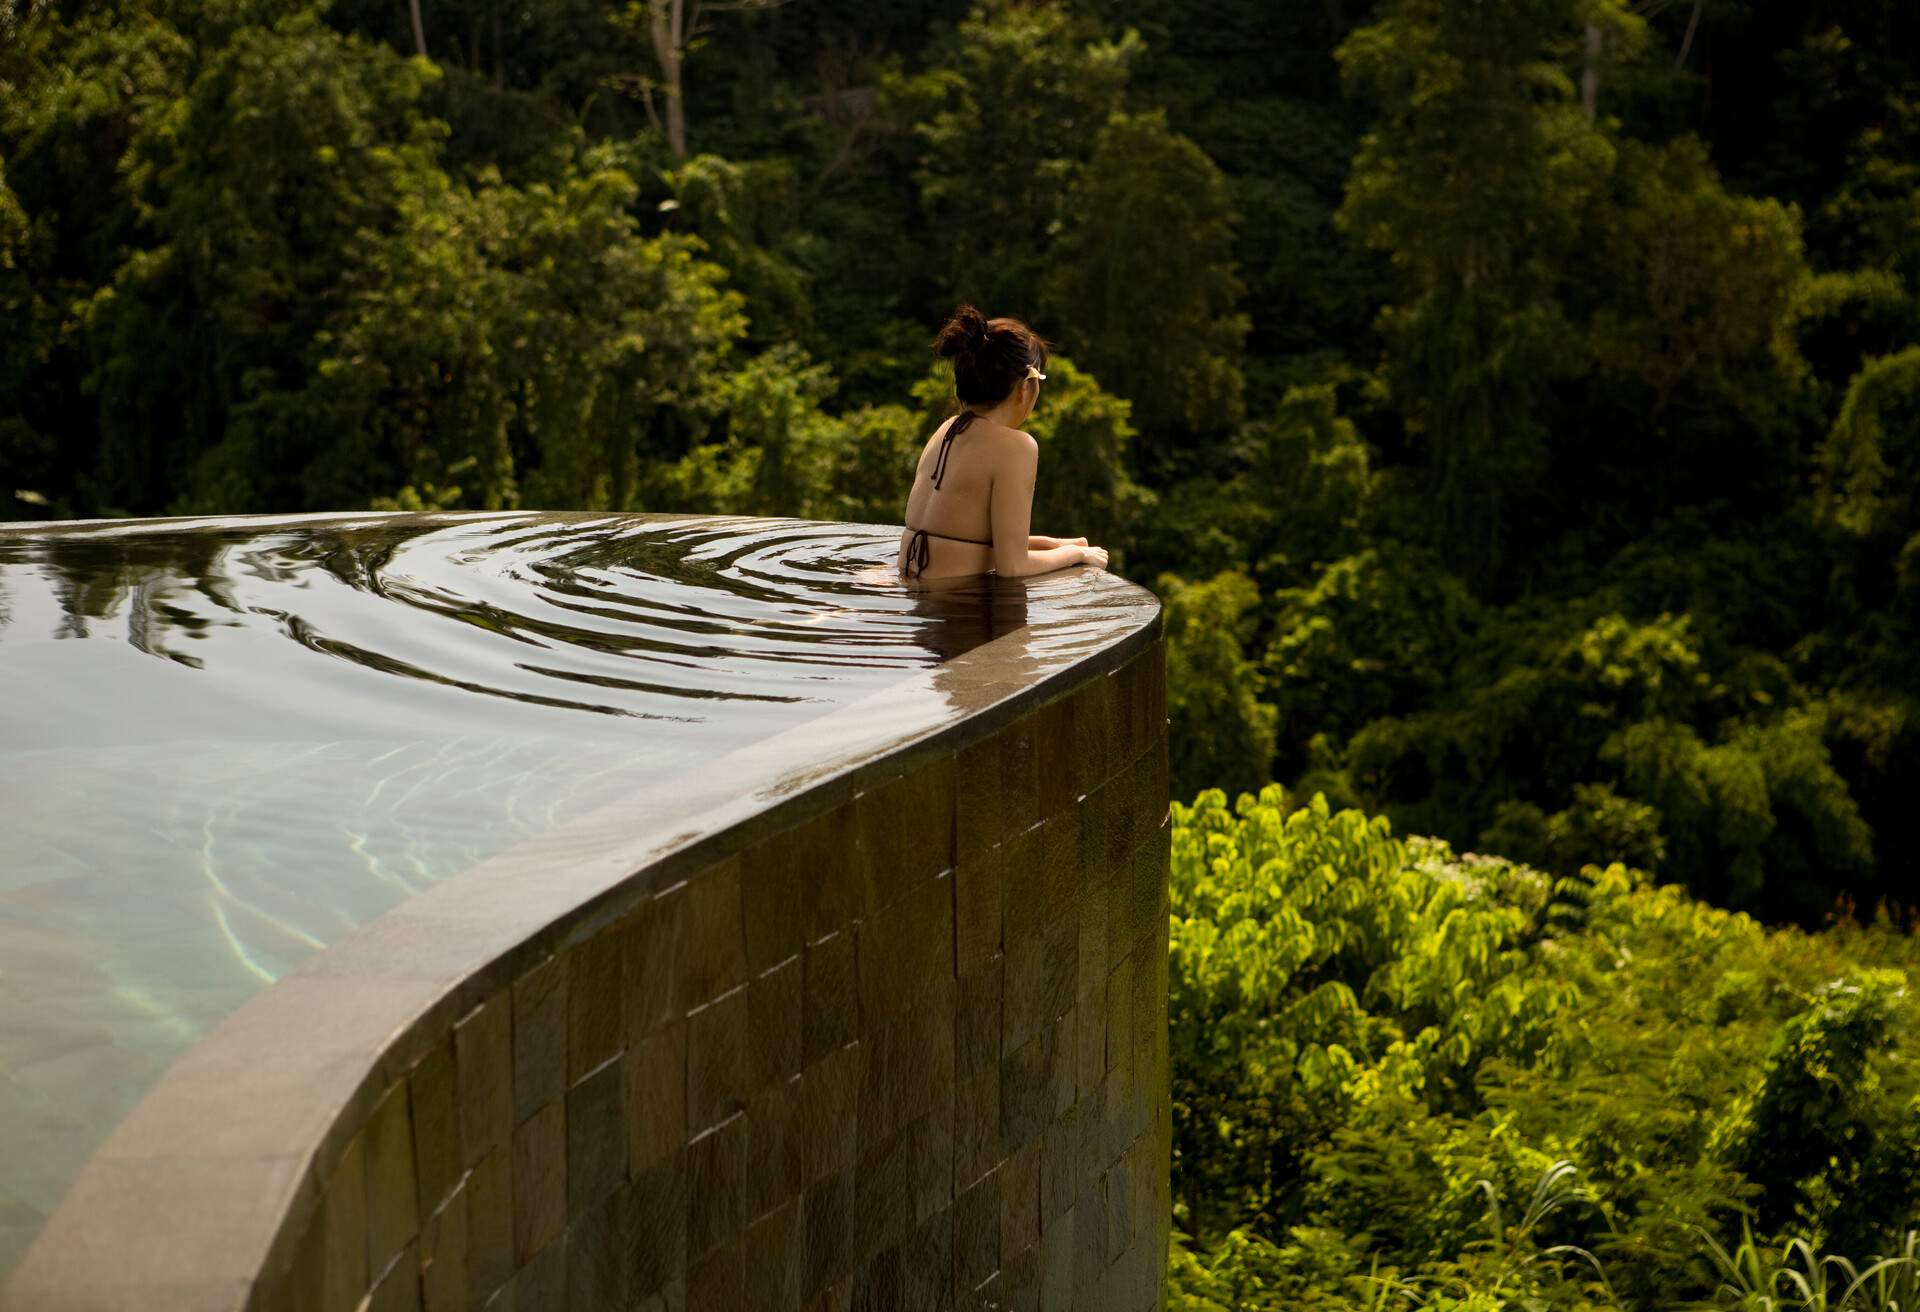 A person in swimwear relax at the edge of a pool and looked out into a jungle in the distance.